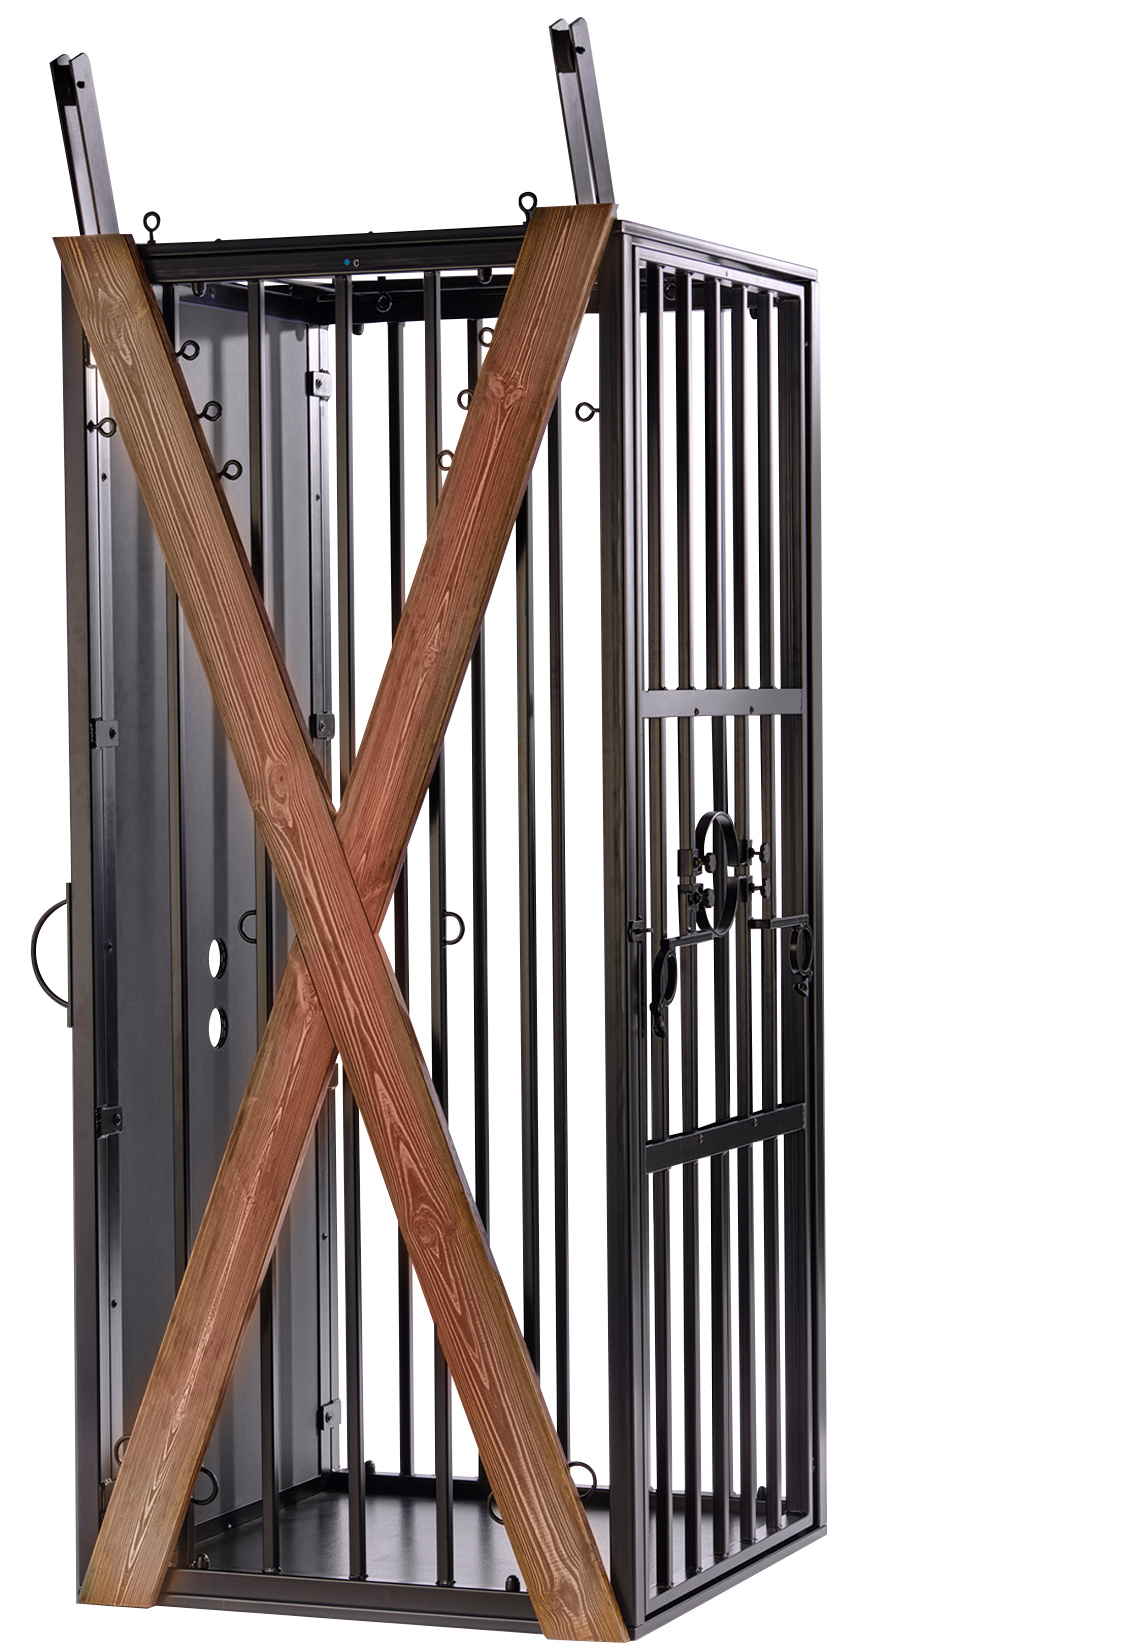 Bdsm Cage With Glory Hole And St Andrews Cross